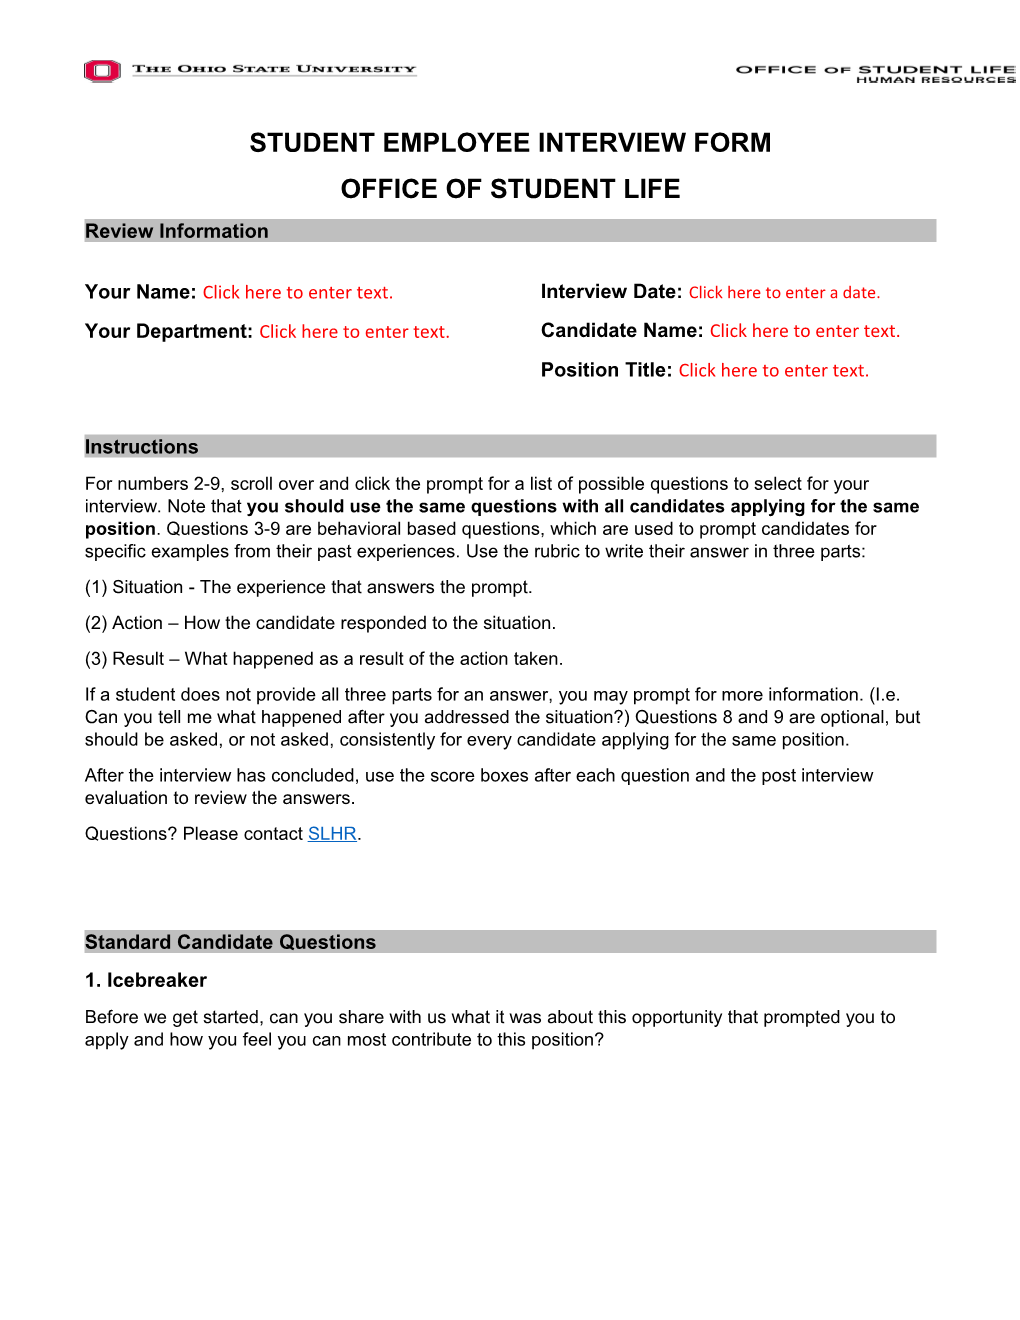 Student Employee Interview Form